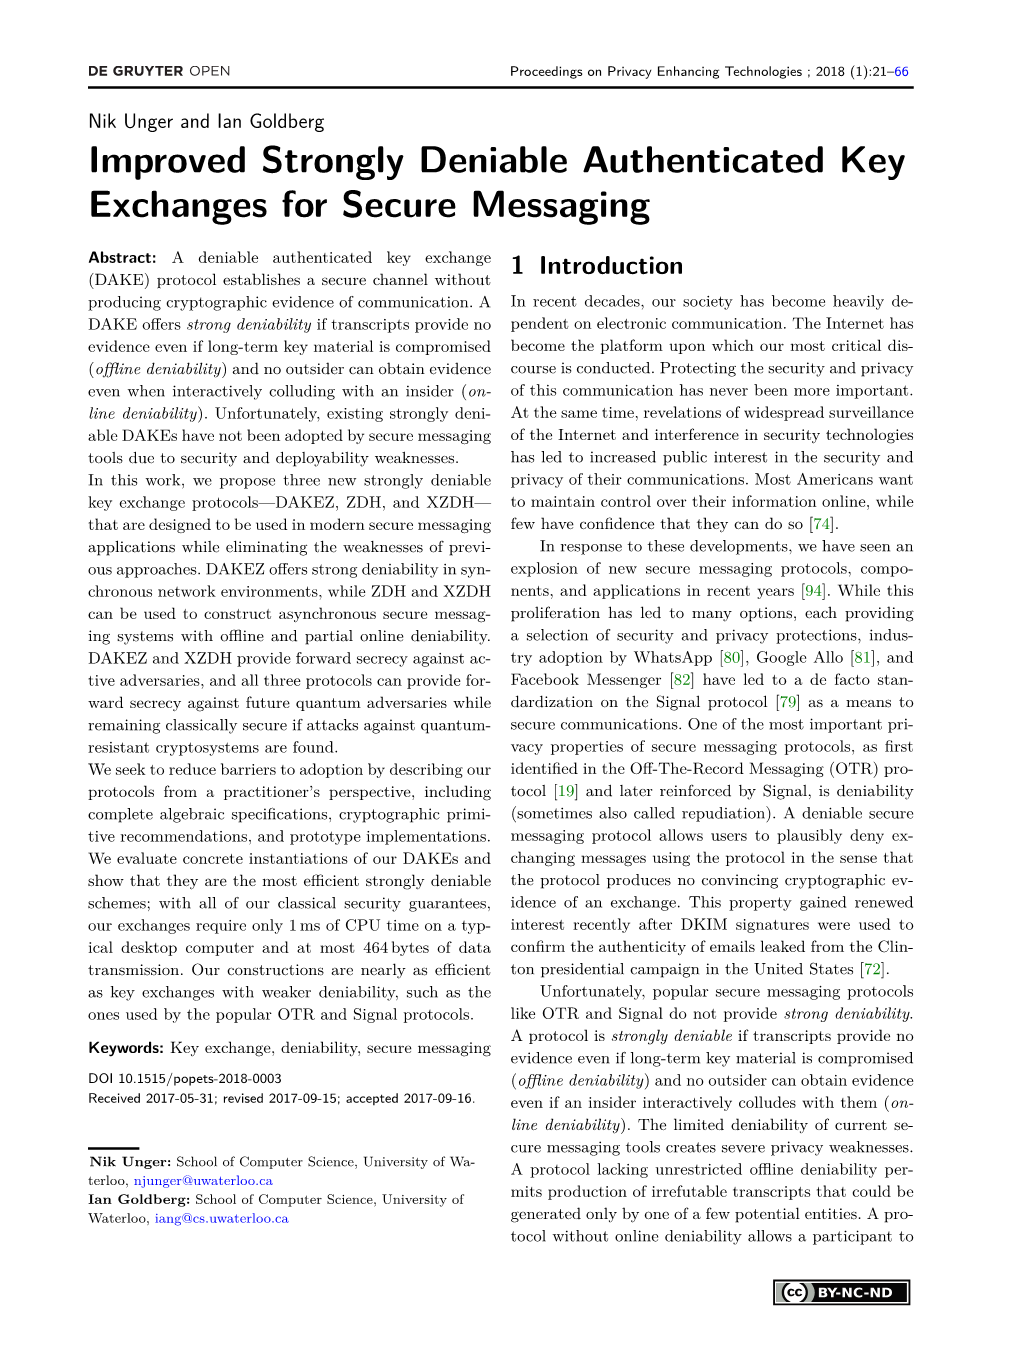 Improved Strongly Deniable Authenticated Key Exchanges for Secure Messaging